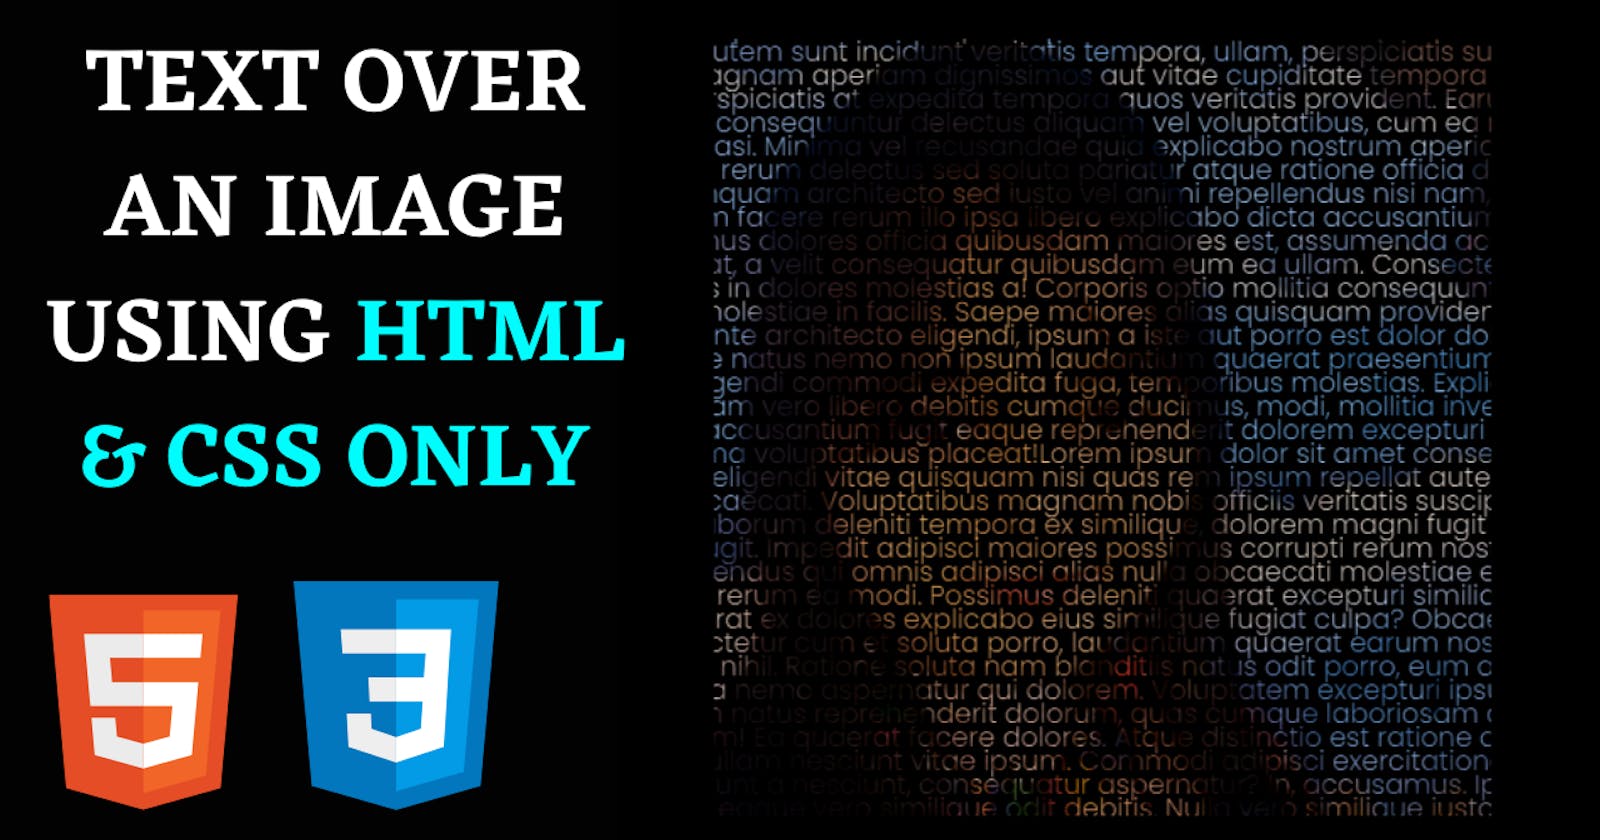 Text Overlay on an Image Using HTML & CSS